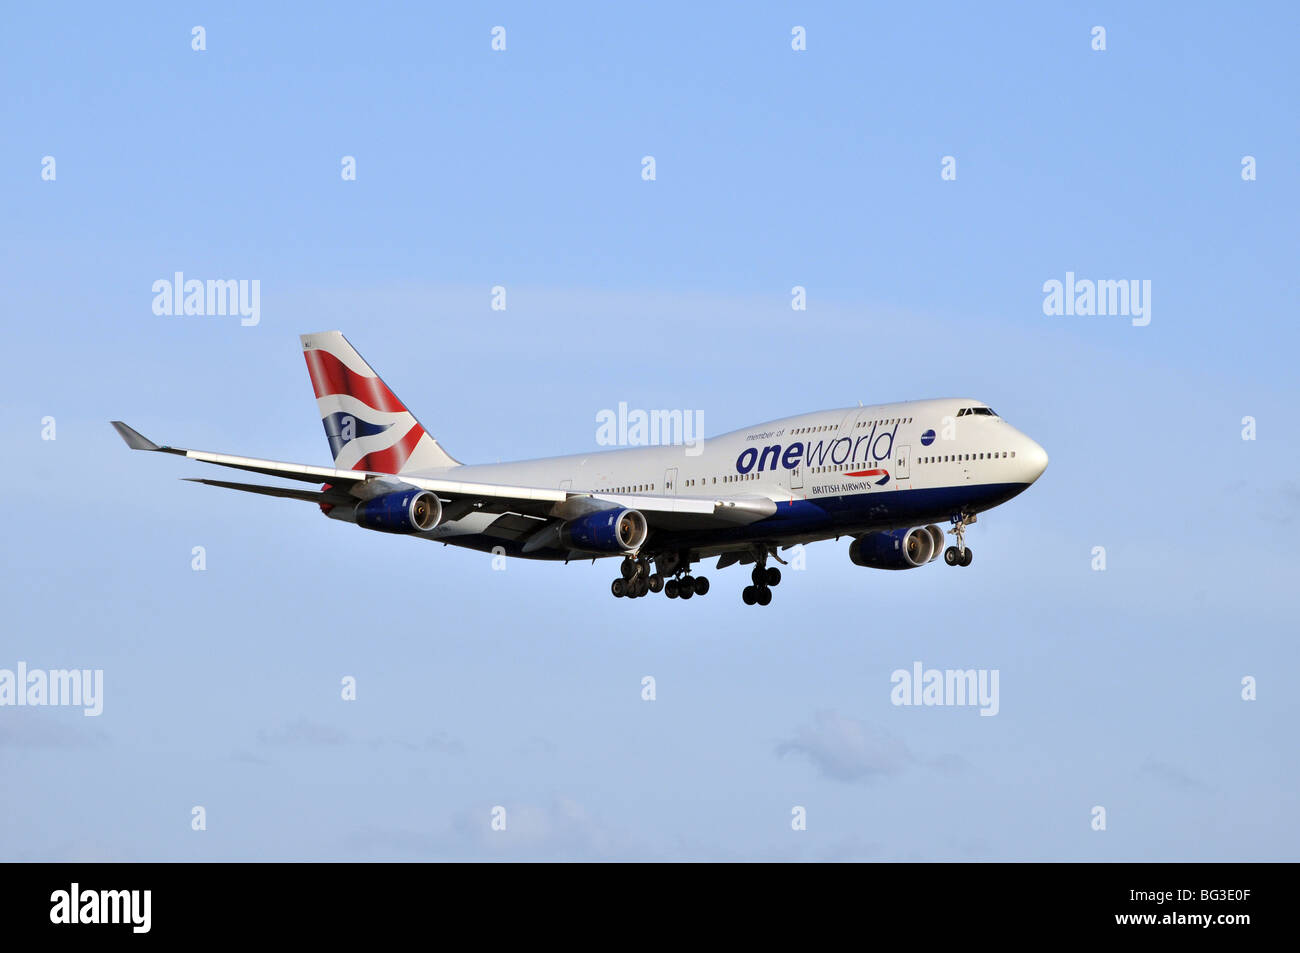 British Airways Boeing 747-400 G-BLNI on final approach with landing gear extended Stock Photo